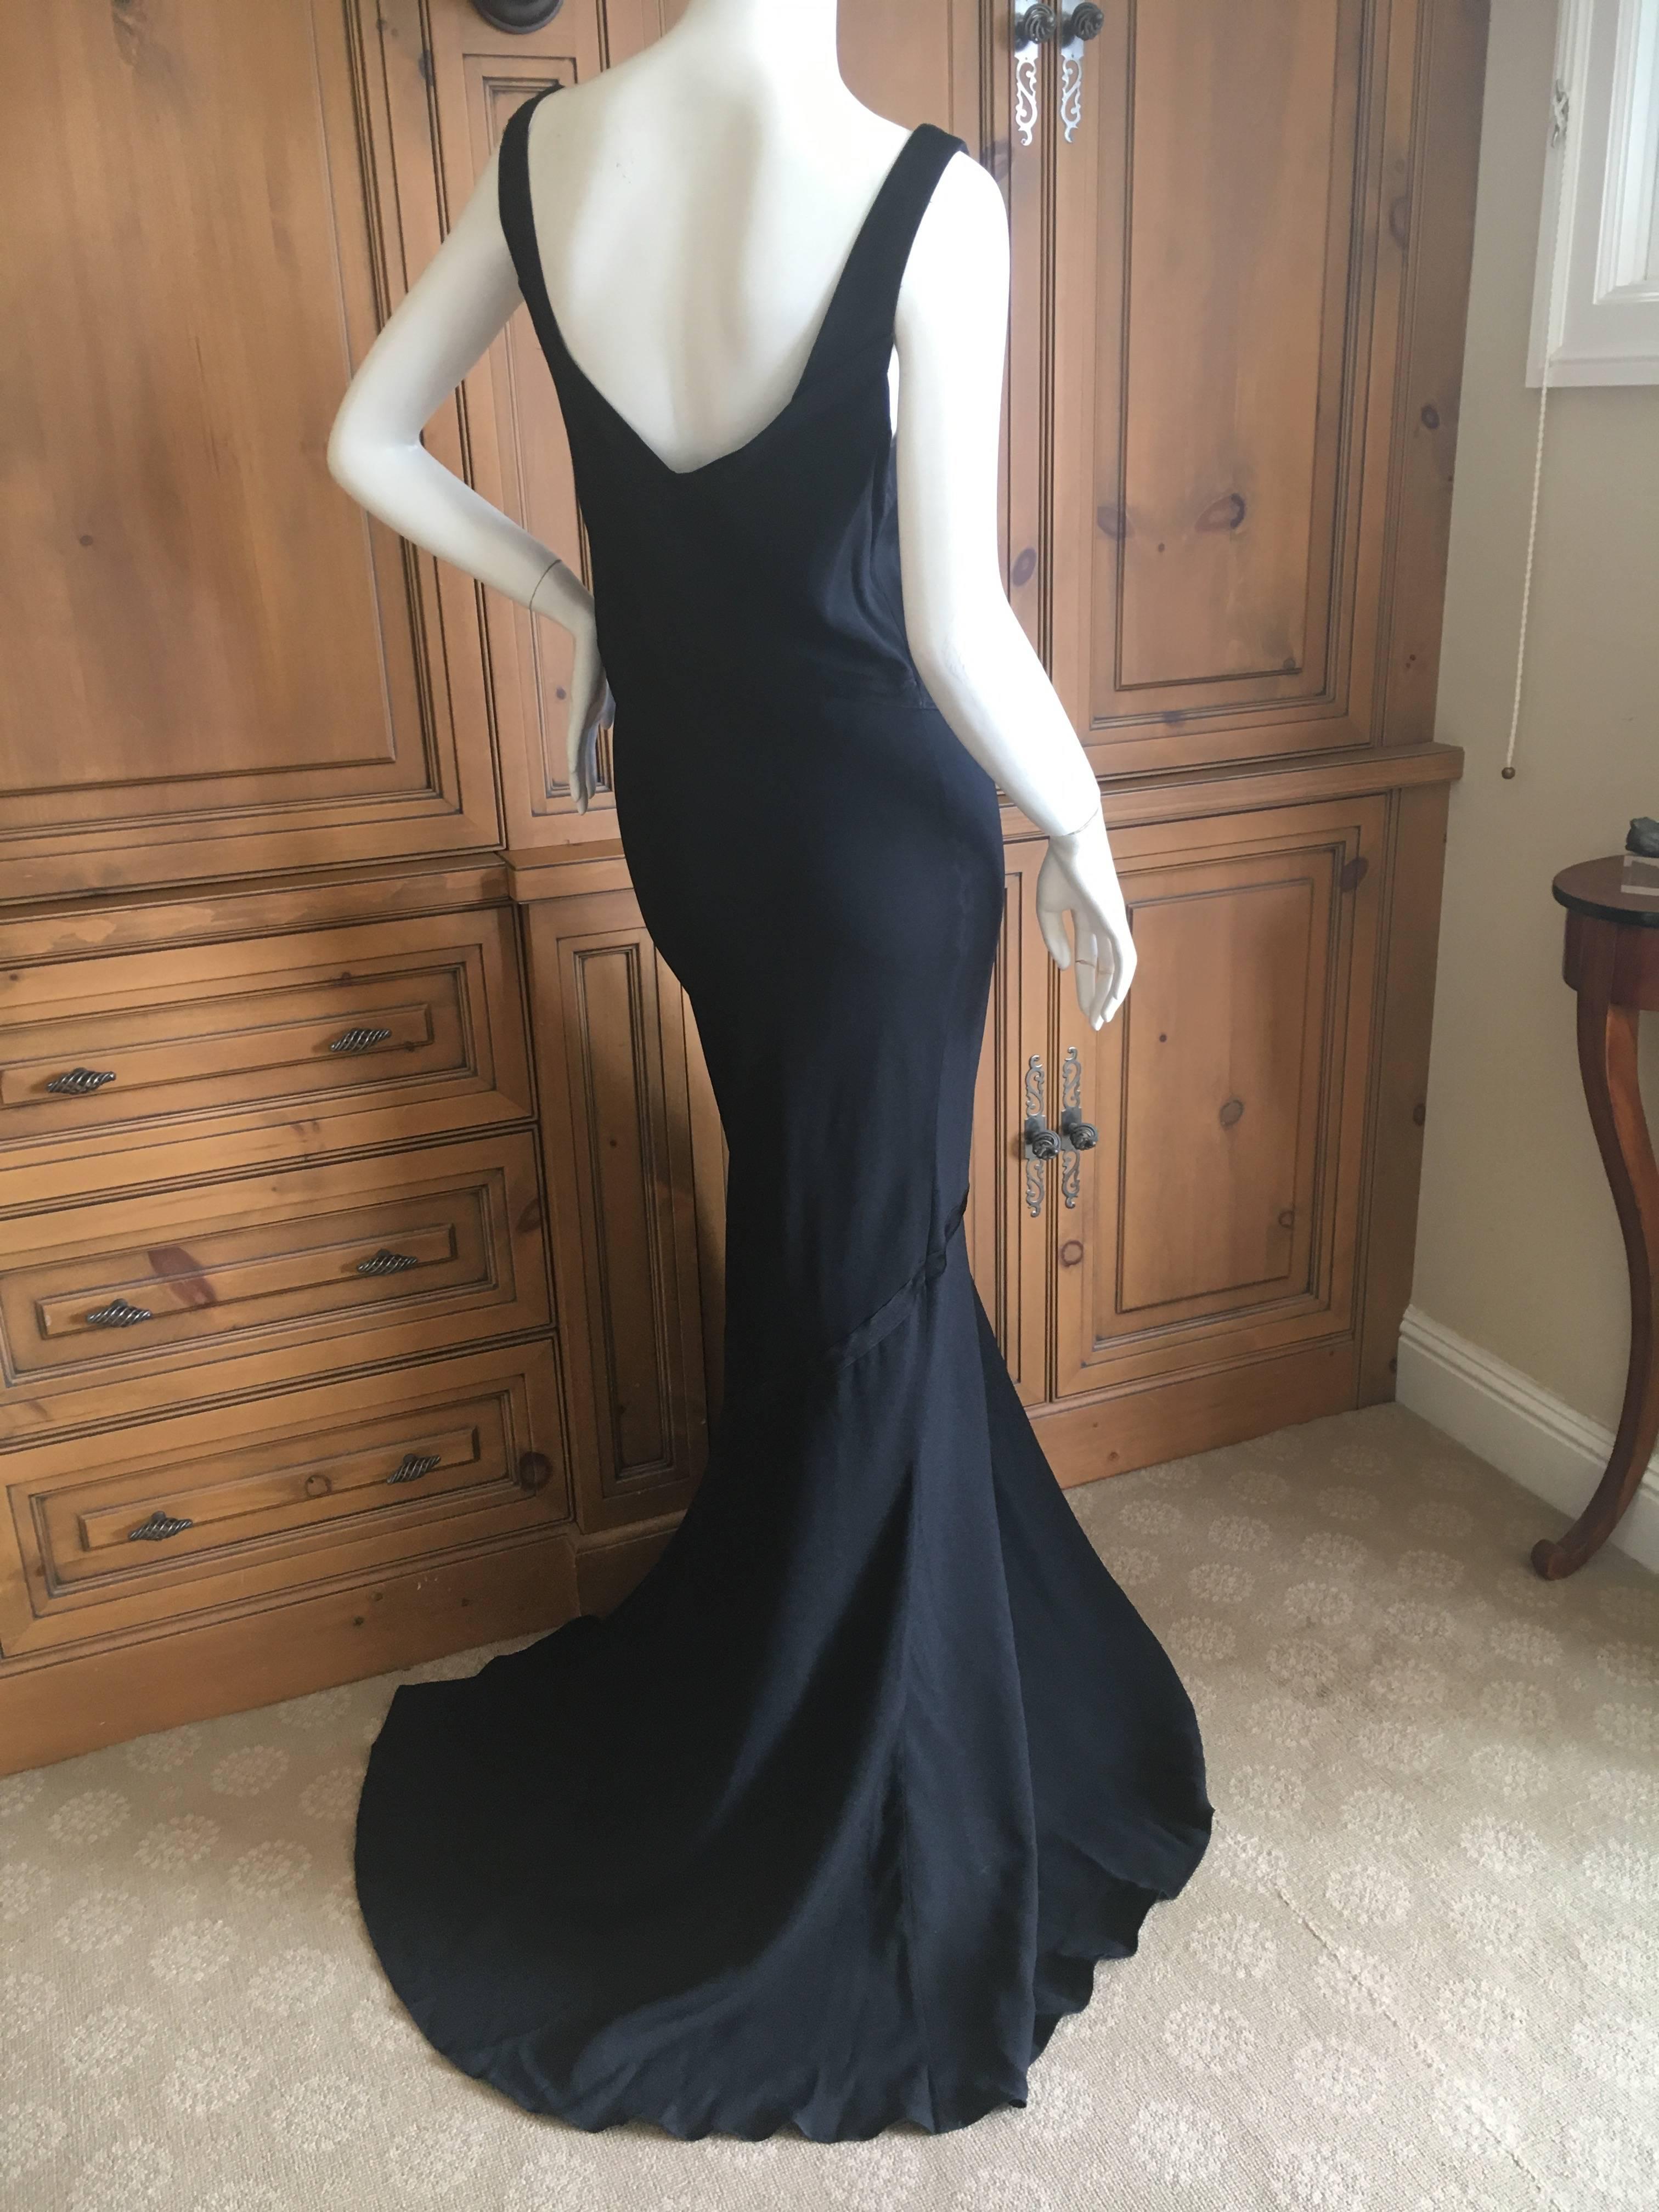 Wonderful long black evening dress from John Galliano, from 2001
This is exquisite , the photos don't capture the contrast in the finishes of the fabric, there are X's in a polished fabric that contrasts with the dress.
This has never been worn and